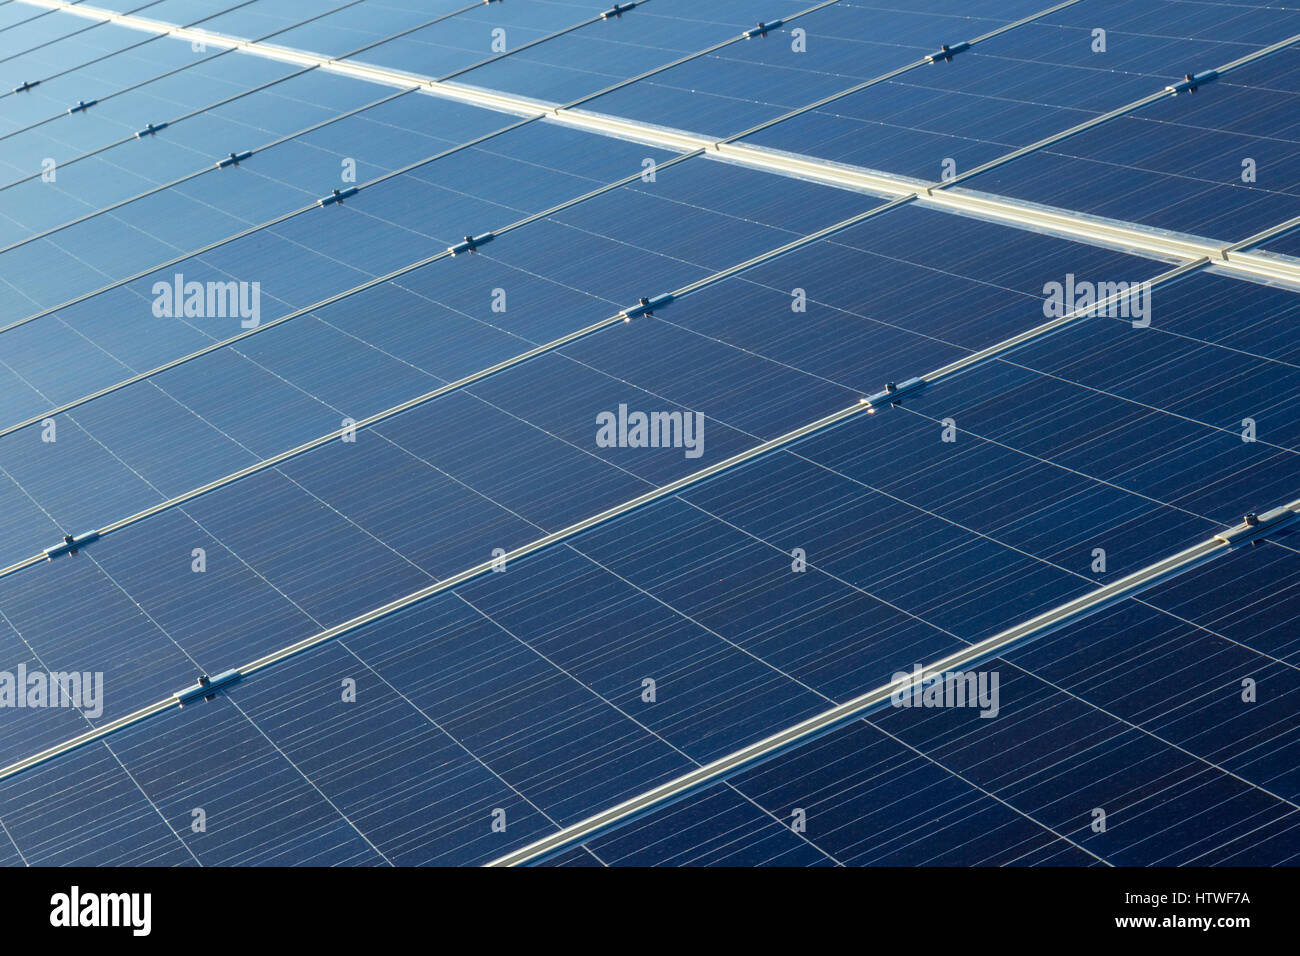 Solar panels in array Capturing sunlight to convert it to green renewable energy. It's clean. No pollution and no noise. Stock Photo